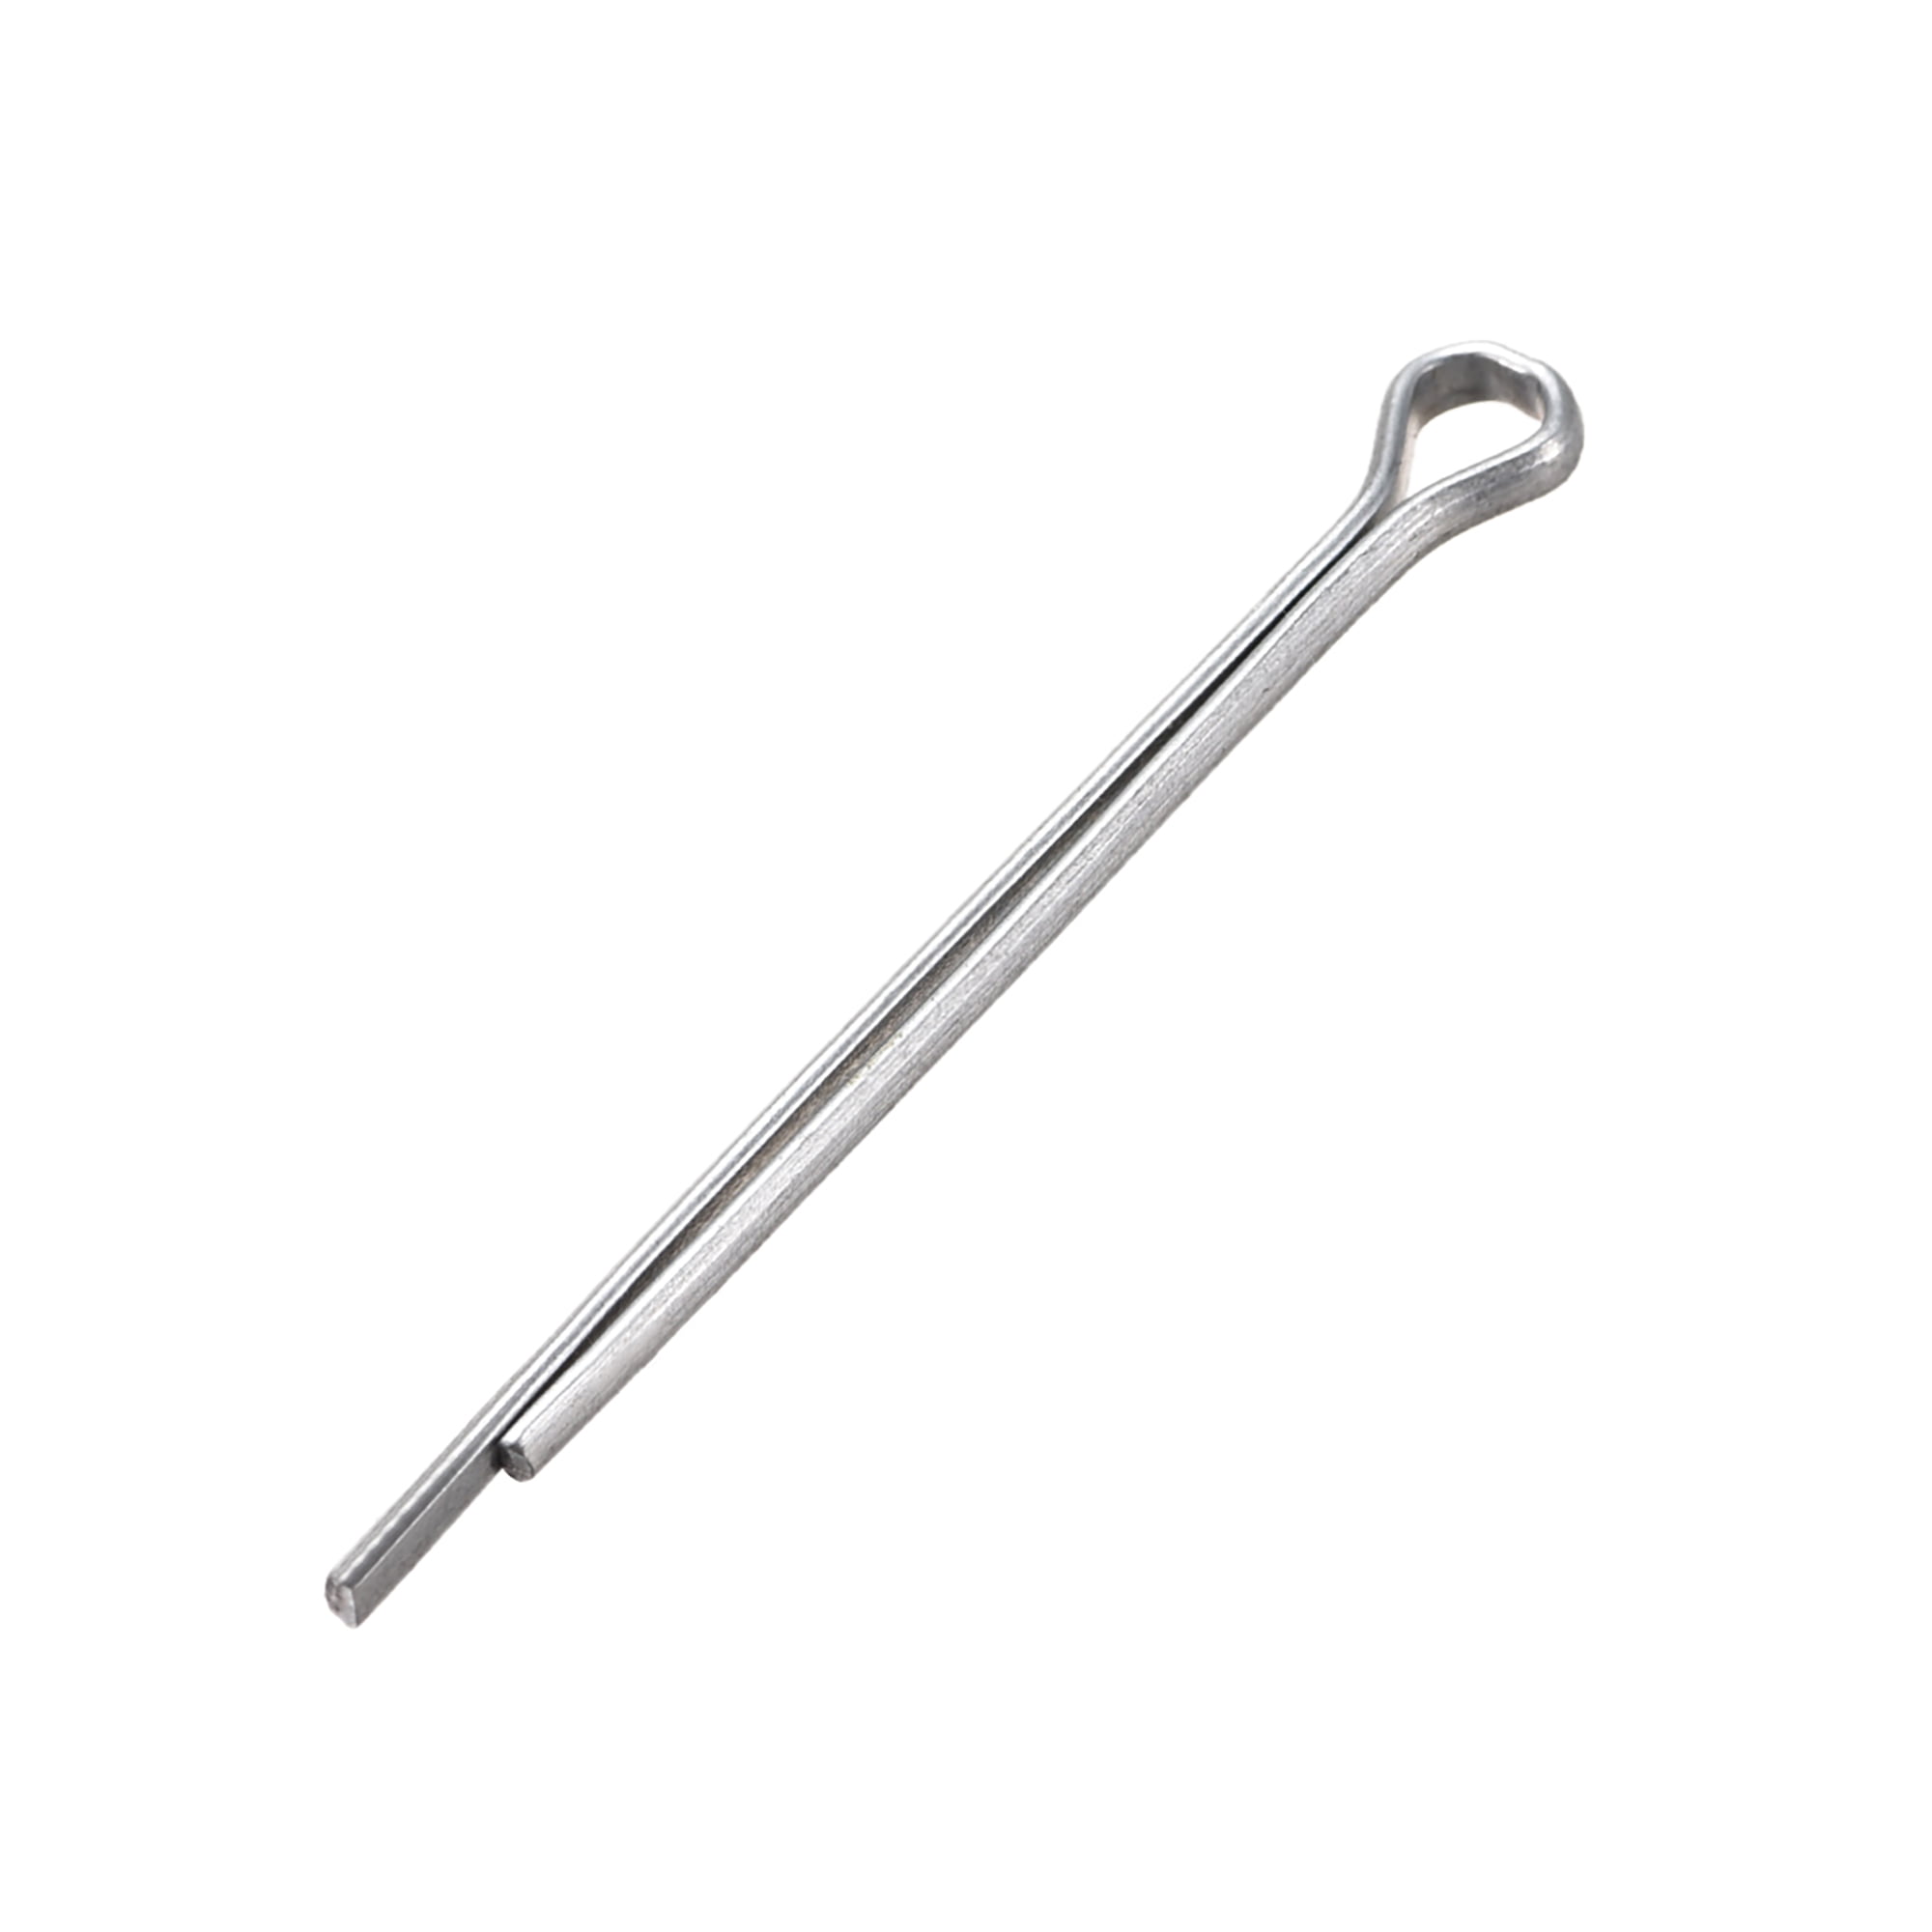 Stainless Steel Split Cotter Pin 2.5 x 38mm 3/32 x 1.5" pack of 25